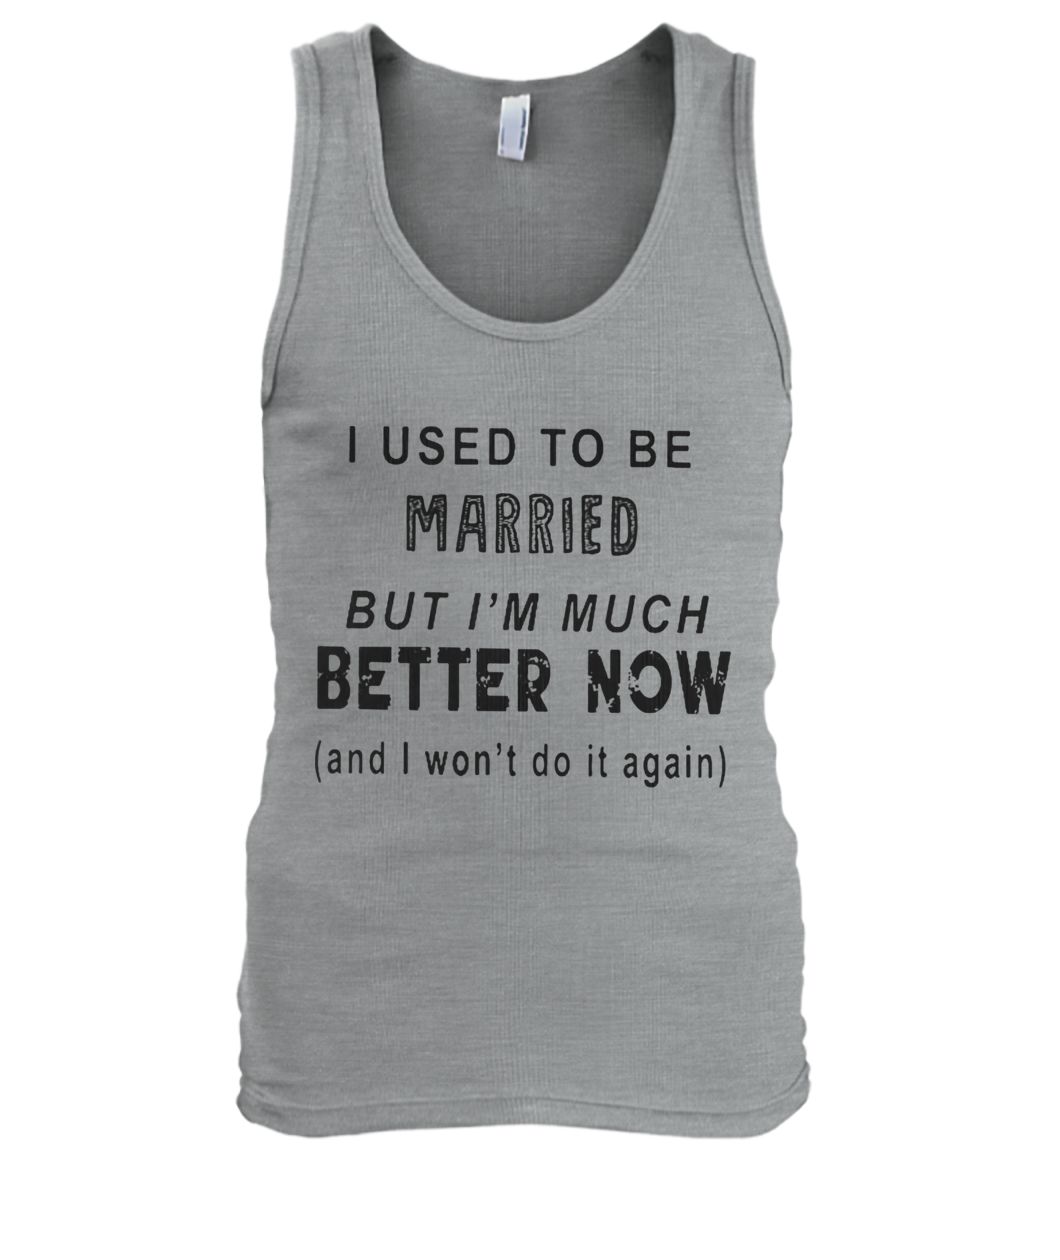 I used to be married but I'm much better now men's tank top